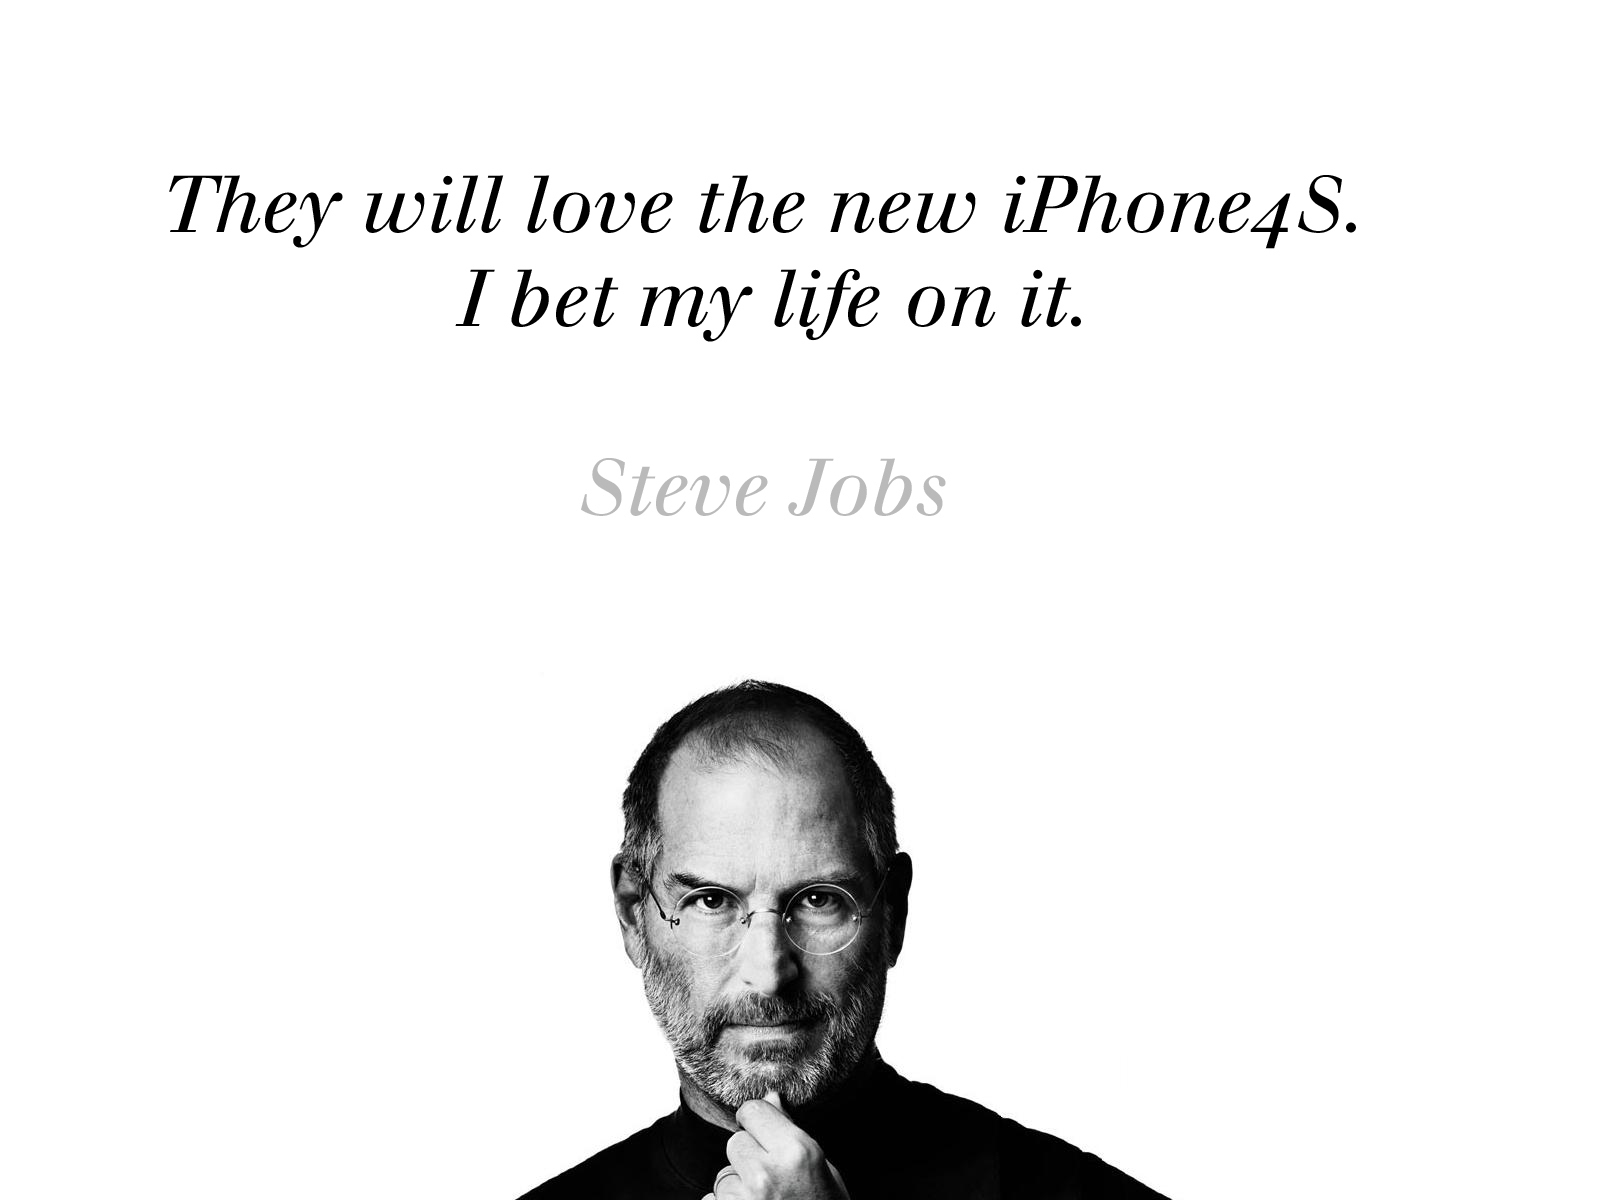 Steve Jobs about iPhone 4S for 1600 x 1200 resolution